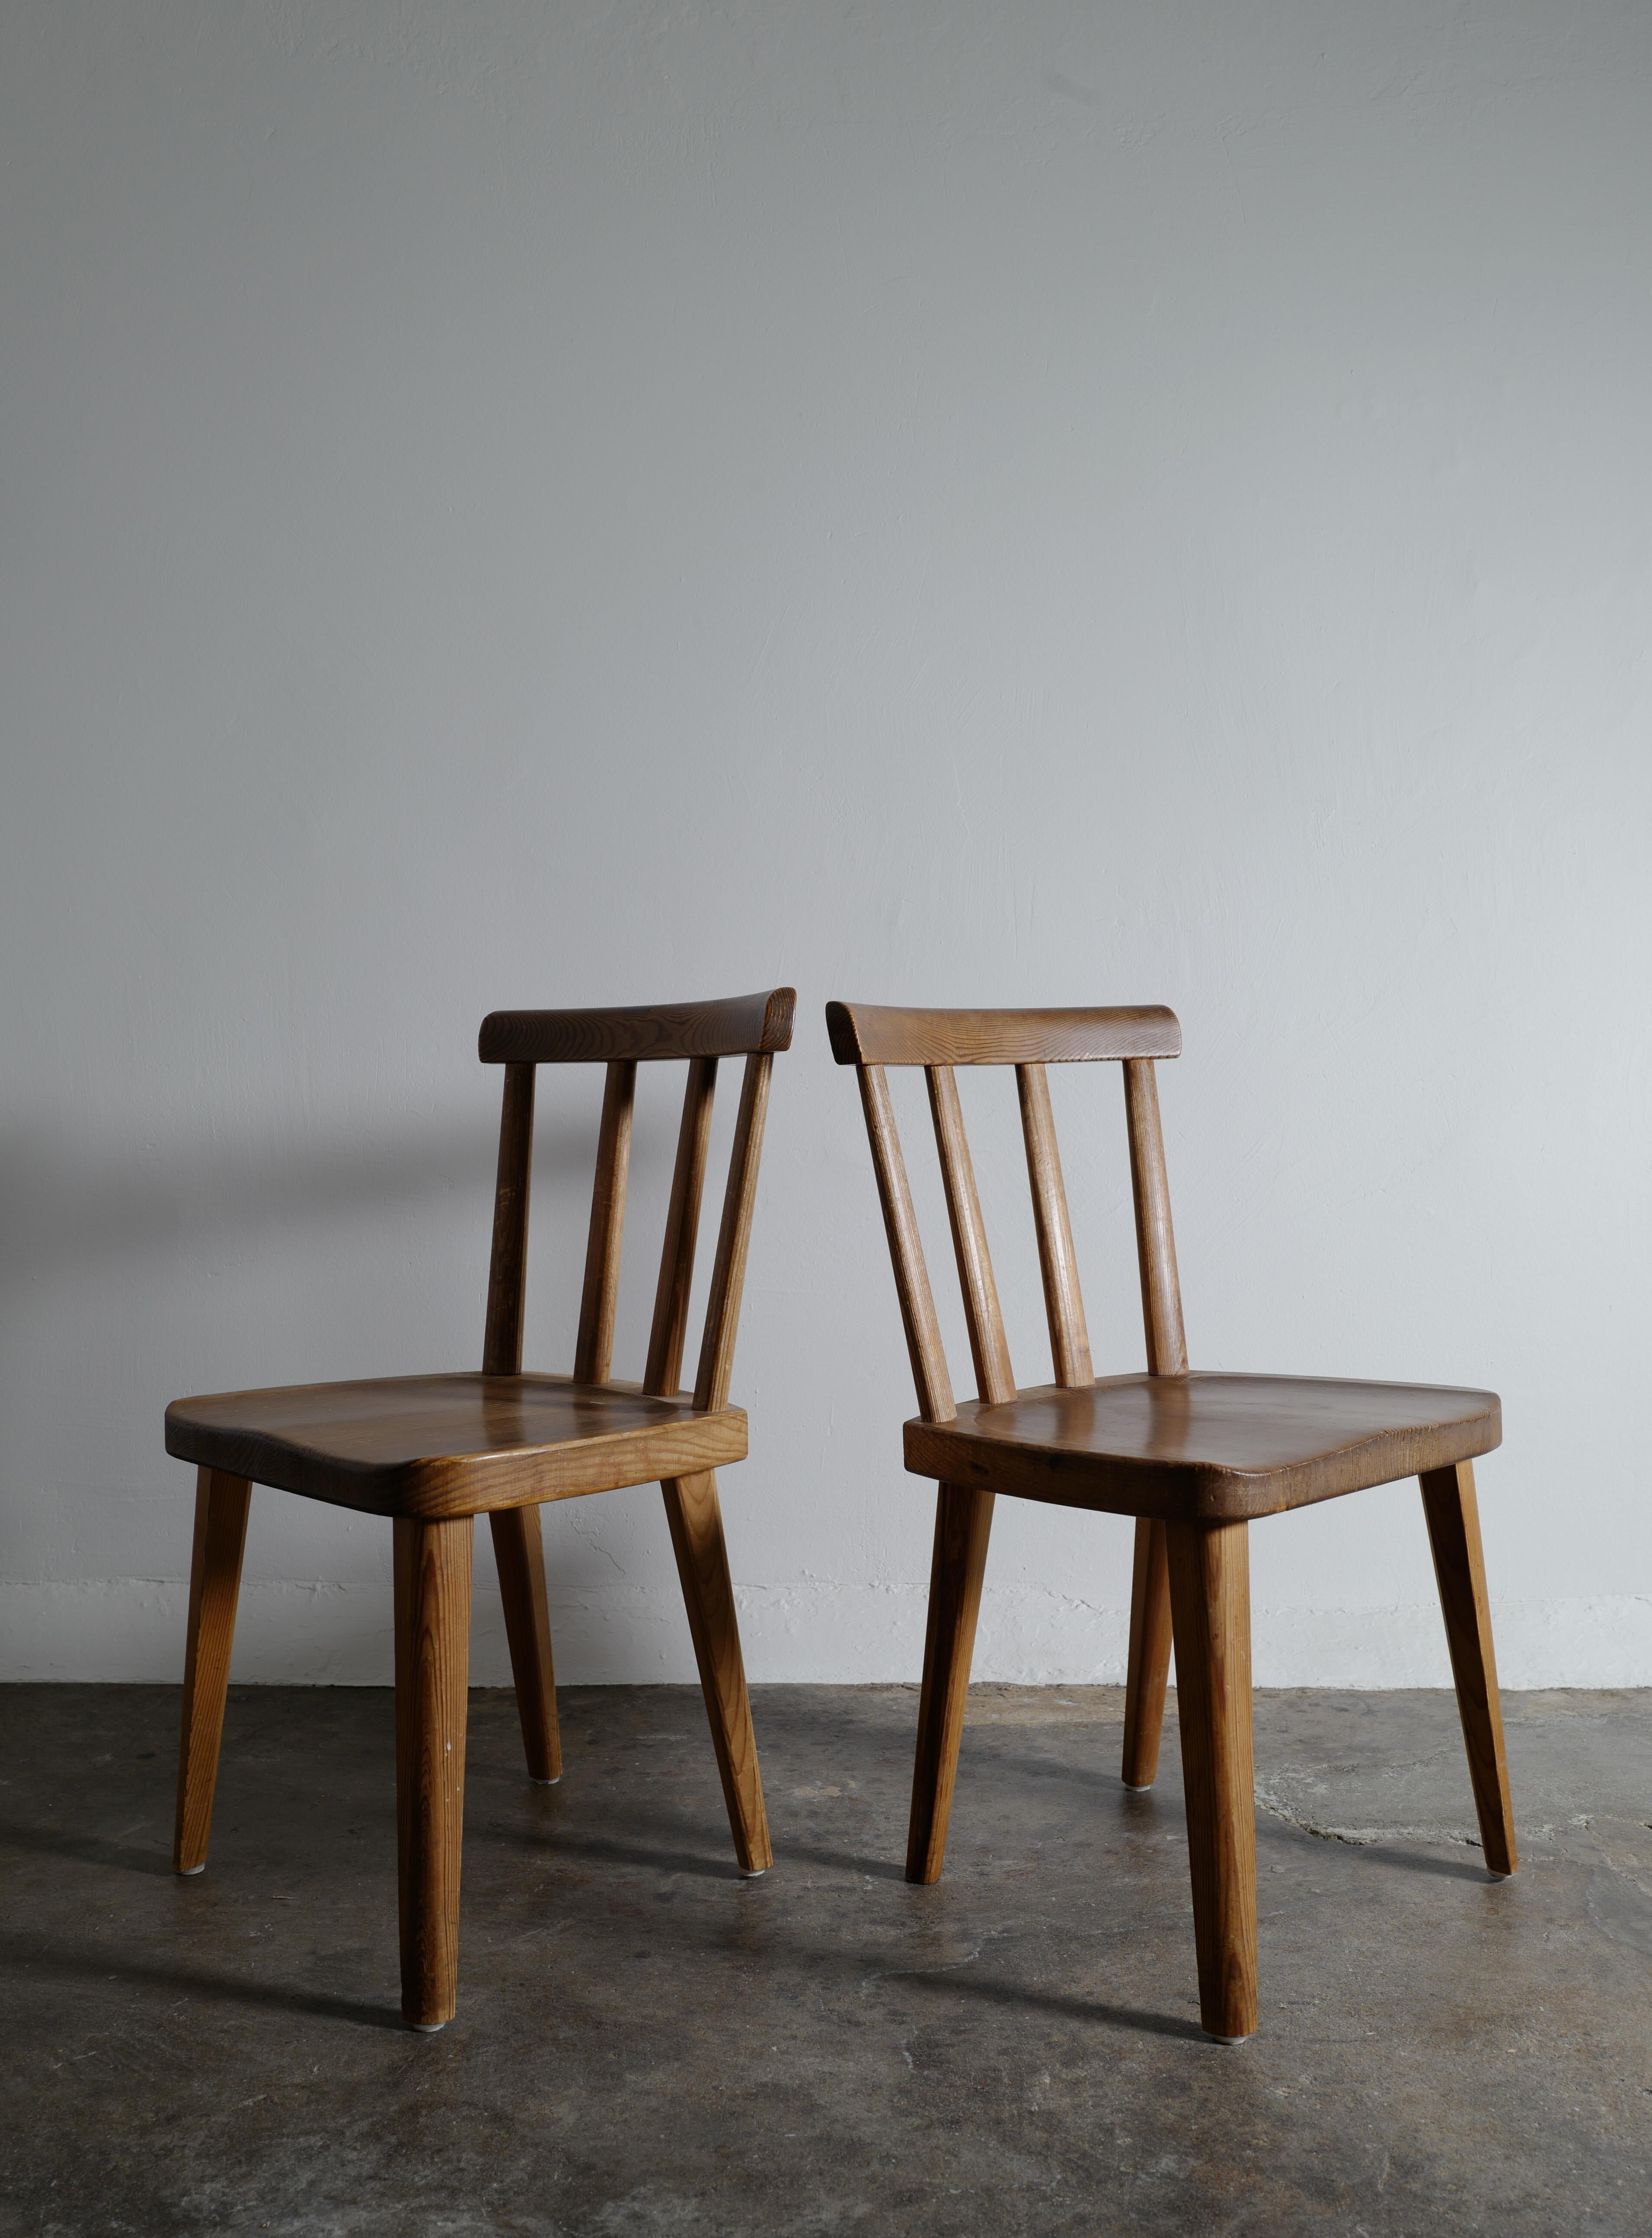 Rare set of six chairs in original condition designed by Axel Einar Hjorth for Nordiska Kompaniet Stockholm during the 1930s. All chairs are in great condition and stable. Showing beautiful patina and signs from use.